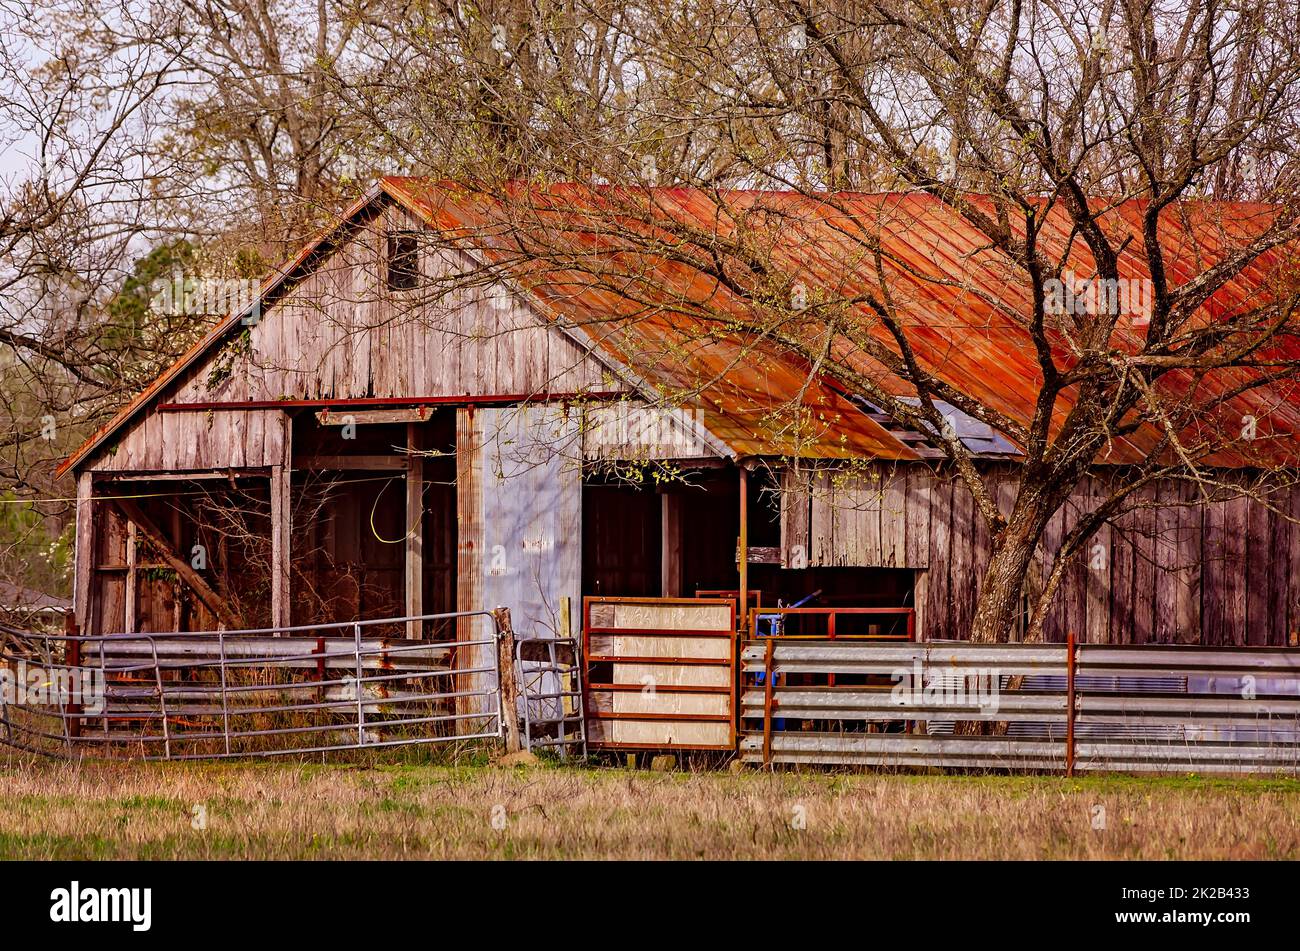 A ramshackle old barn is pictured, March 6, 2012, in West Point, Mississippi. Stock Photo